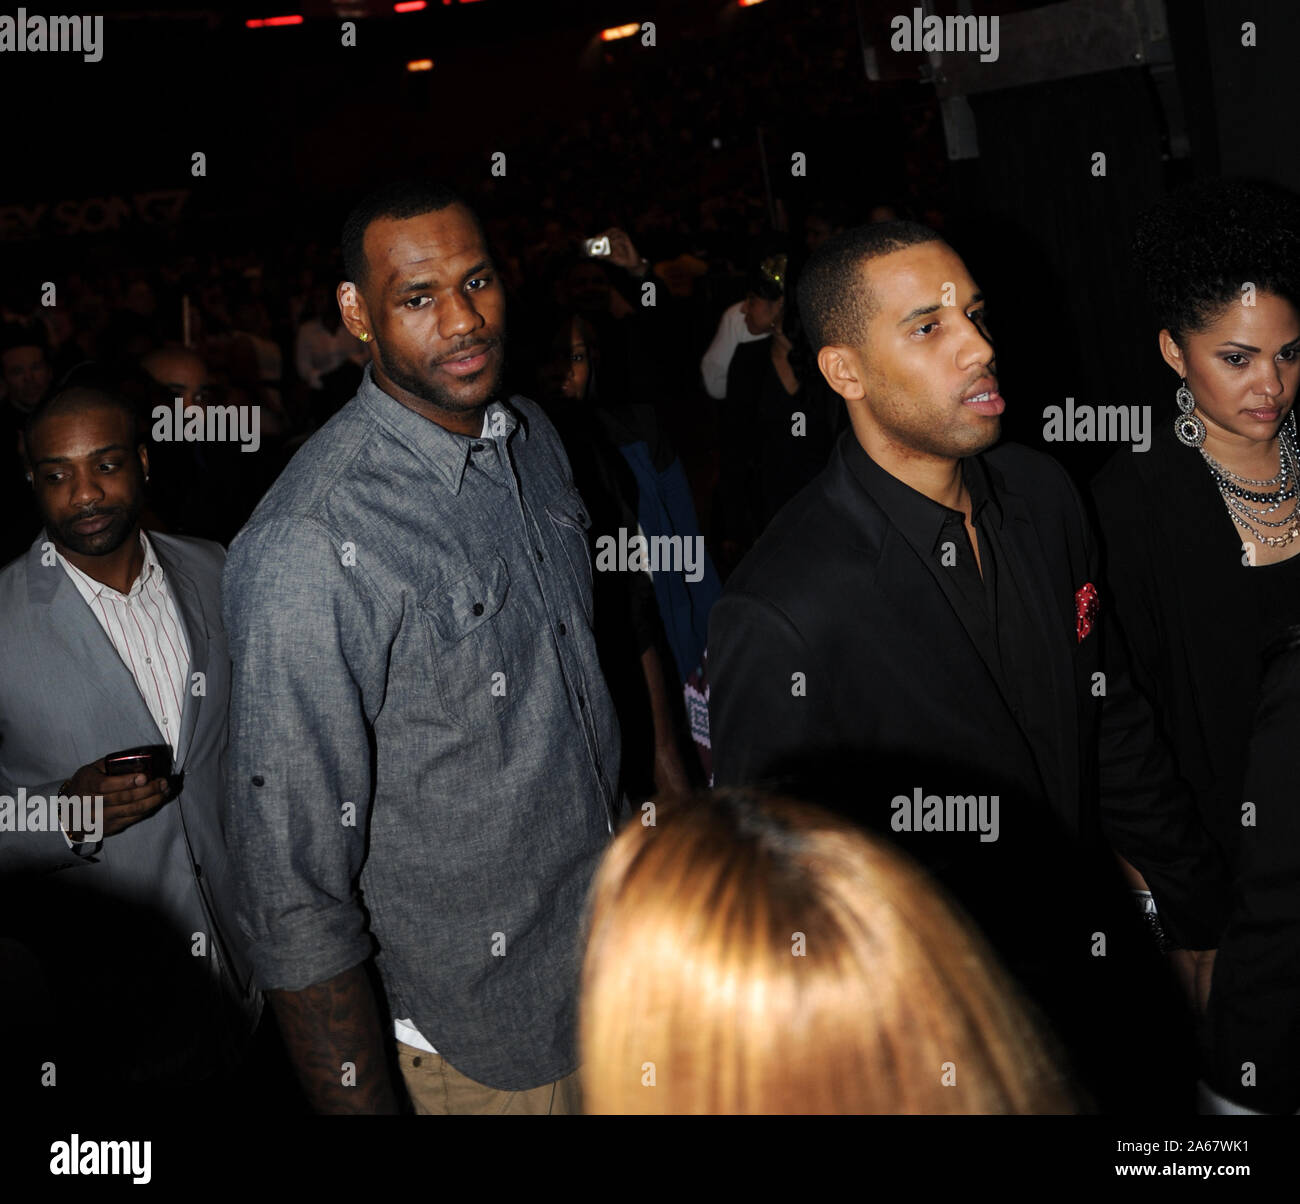 MIAMI BEACH, FL - DECEMBER 31: (EXCLUSIVE COVERAGE) LeBron James watches Usher (AKA Ursher Raymond IV (born October 14, 1978) performs at AmericanAirlines Arena New Years Eve with special guest Trey Songz on December 31, 2010 in Miami, Florida People: LeBron James Credit: Storms Media Group/Alamy Live News Stock Photo